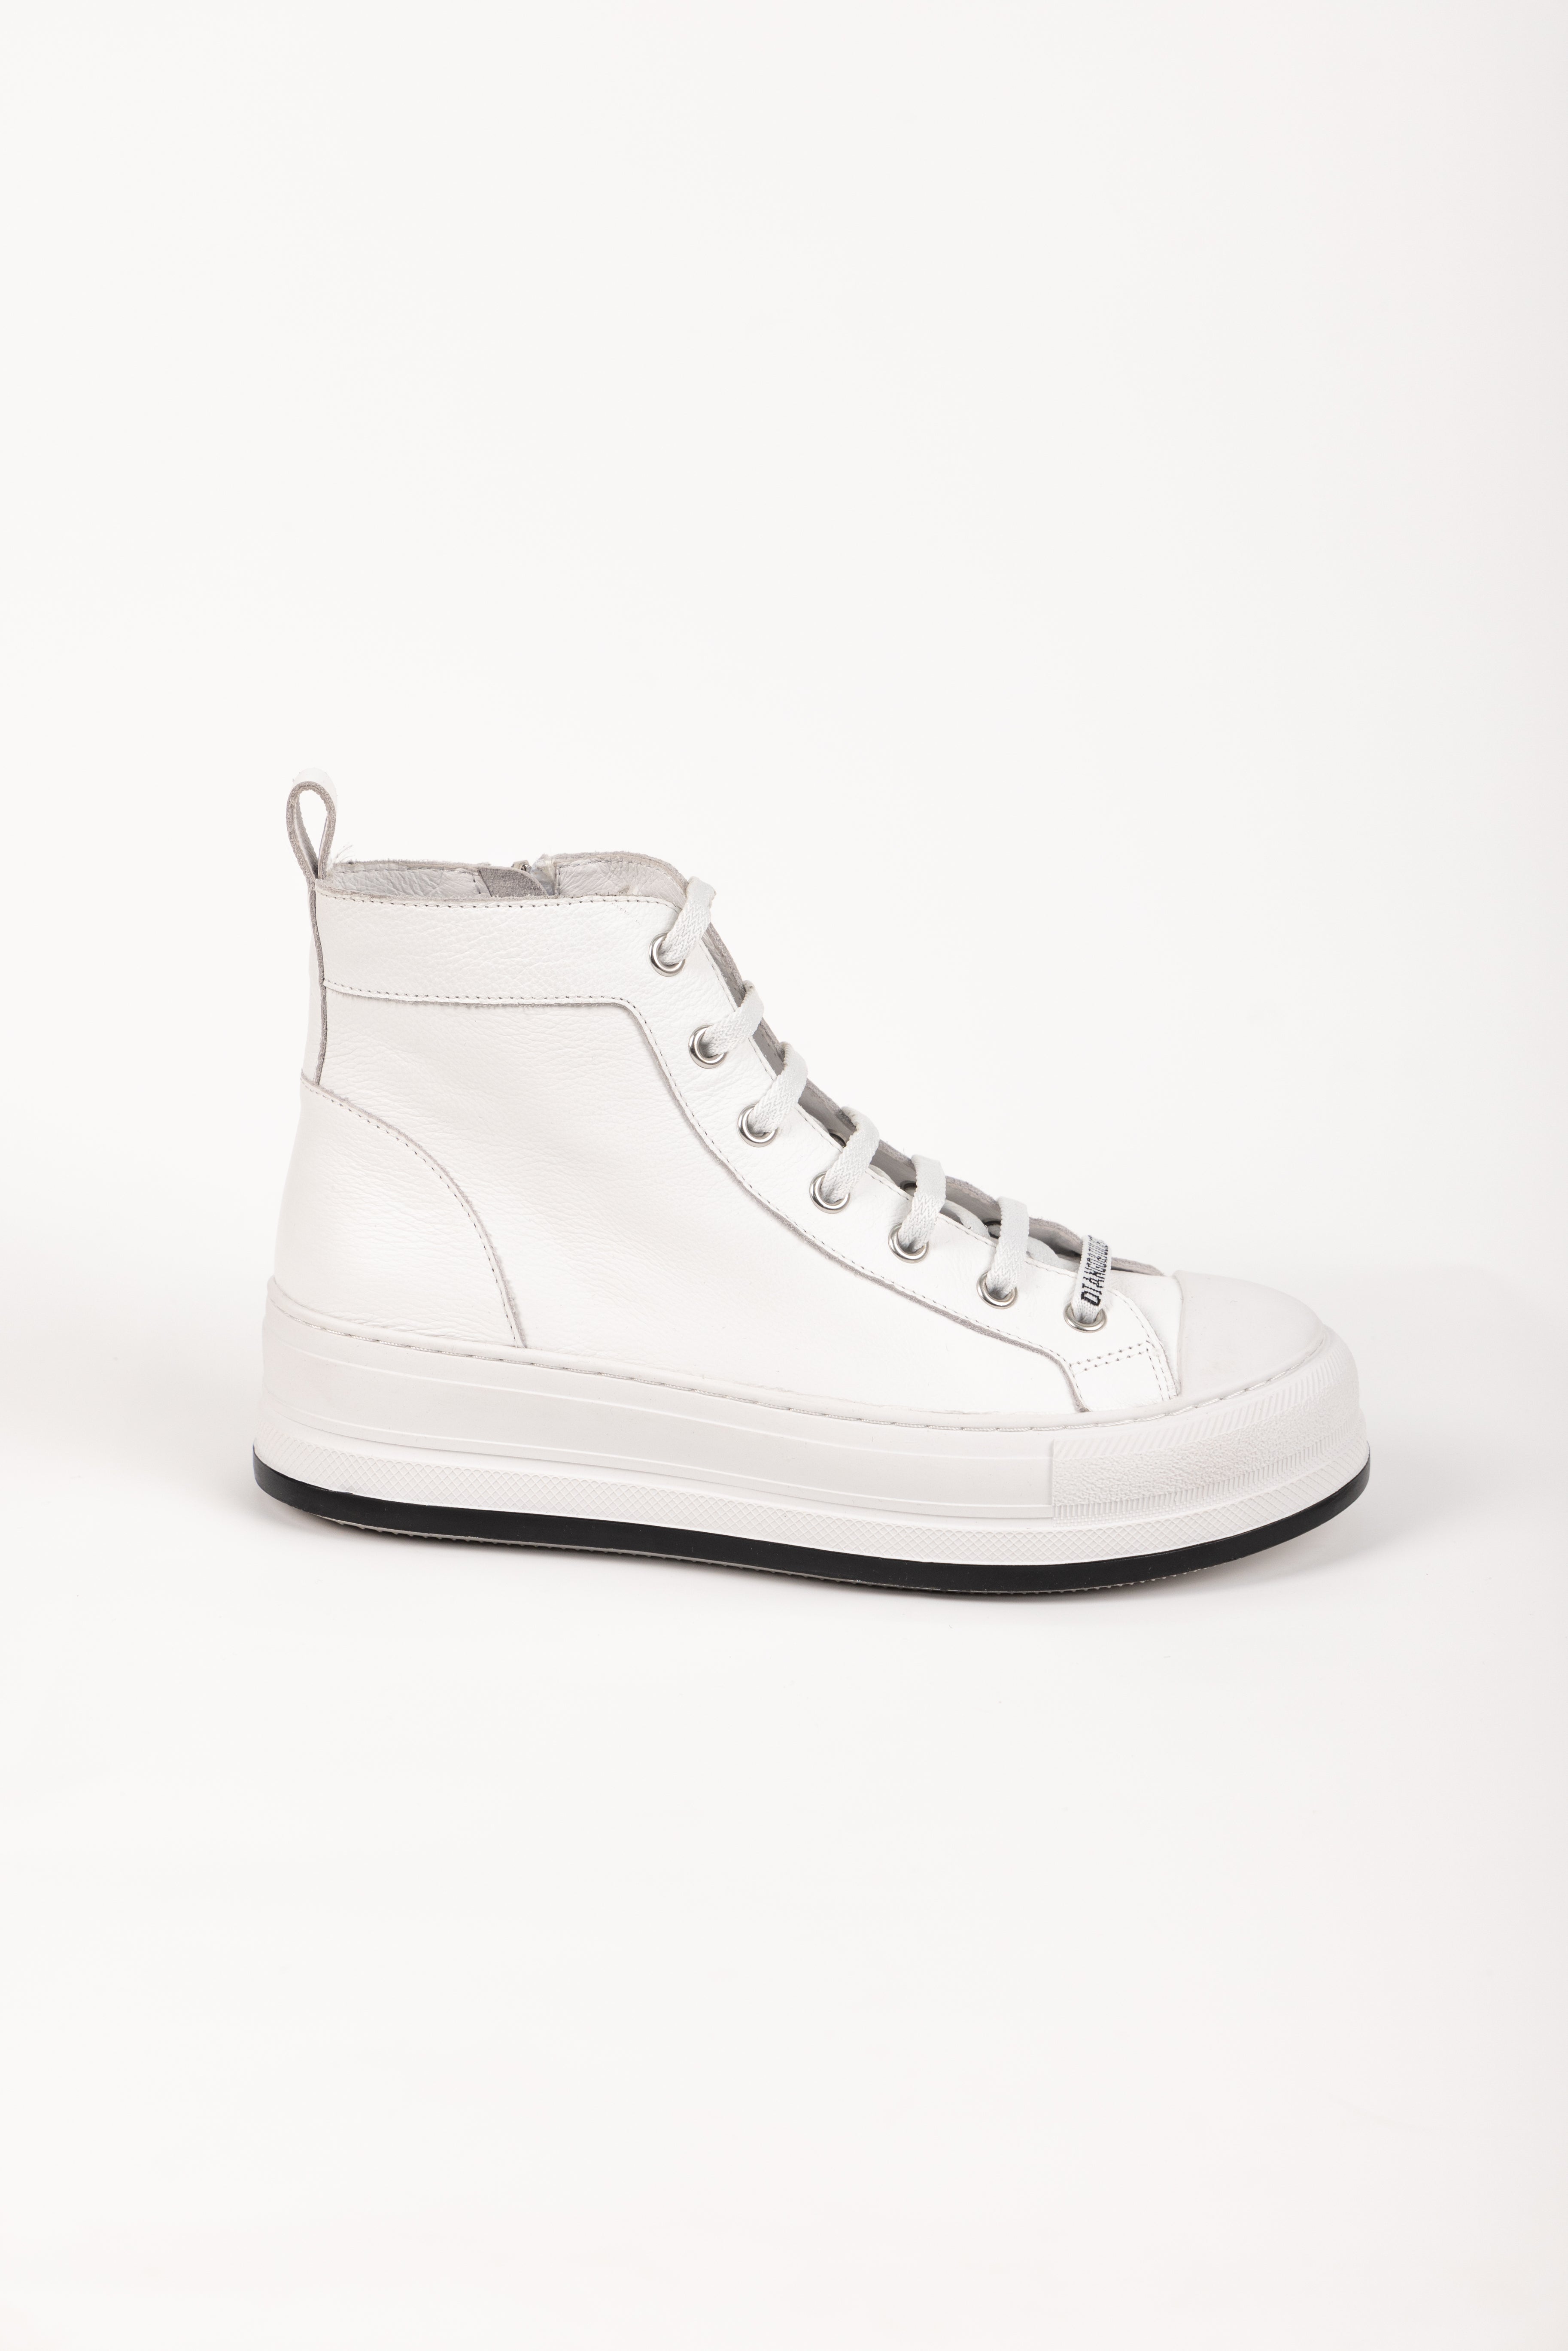 GAMBIA SNEAKER WHITE LEATHER